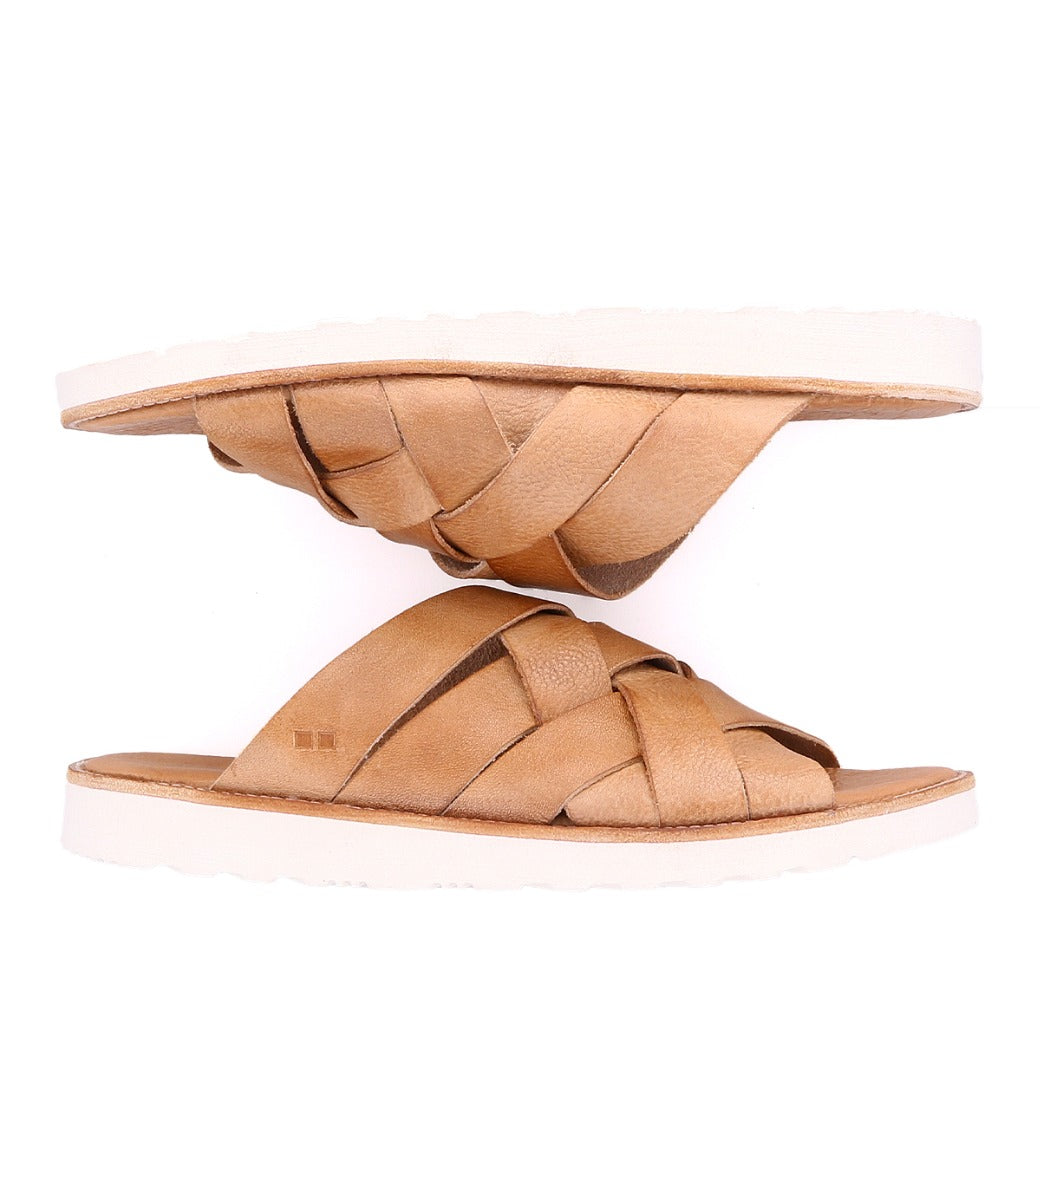 A pair of Abraham Light by Bed Stu leather sandals on a white background.